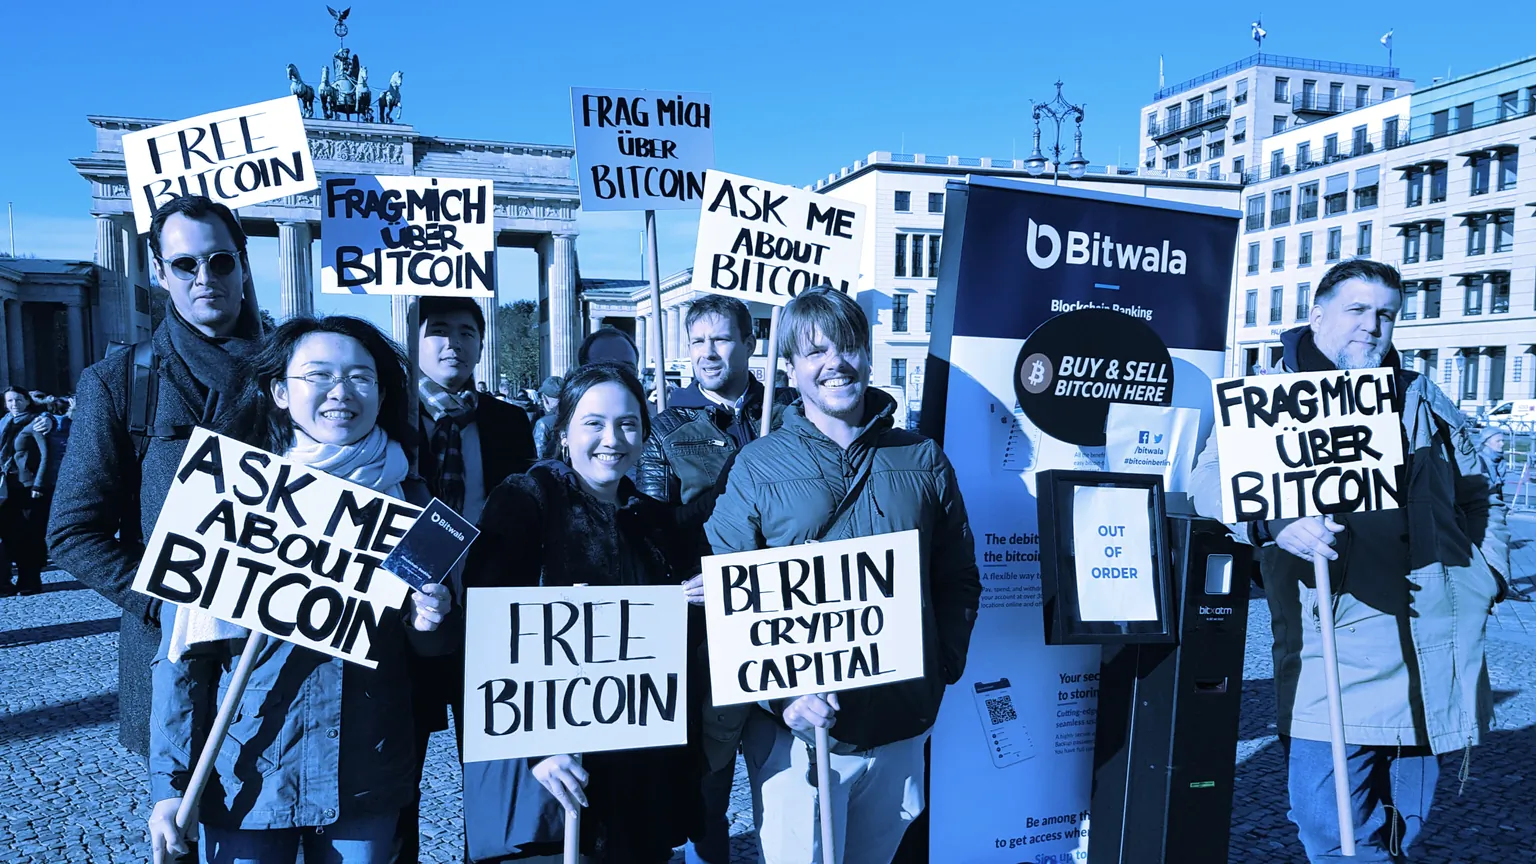 The Bitwala crew is taking this protest extremely seriously. IMAGE SOURCE: Bitwala